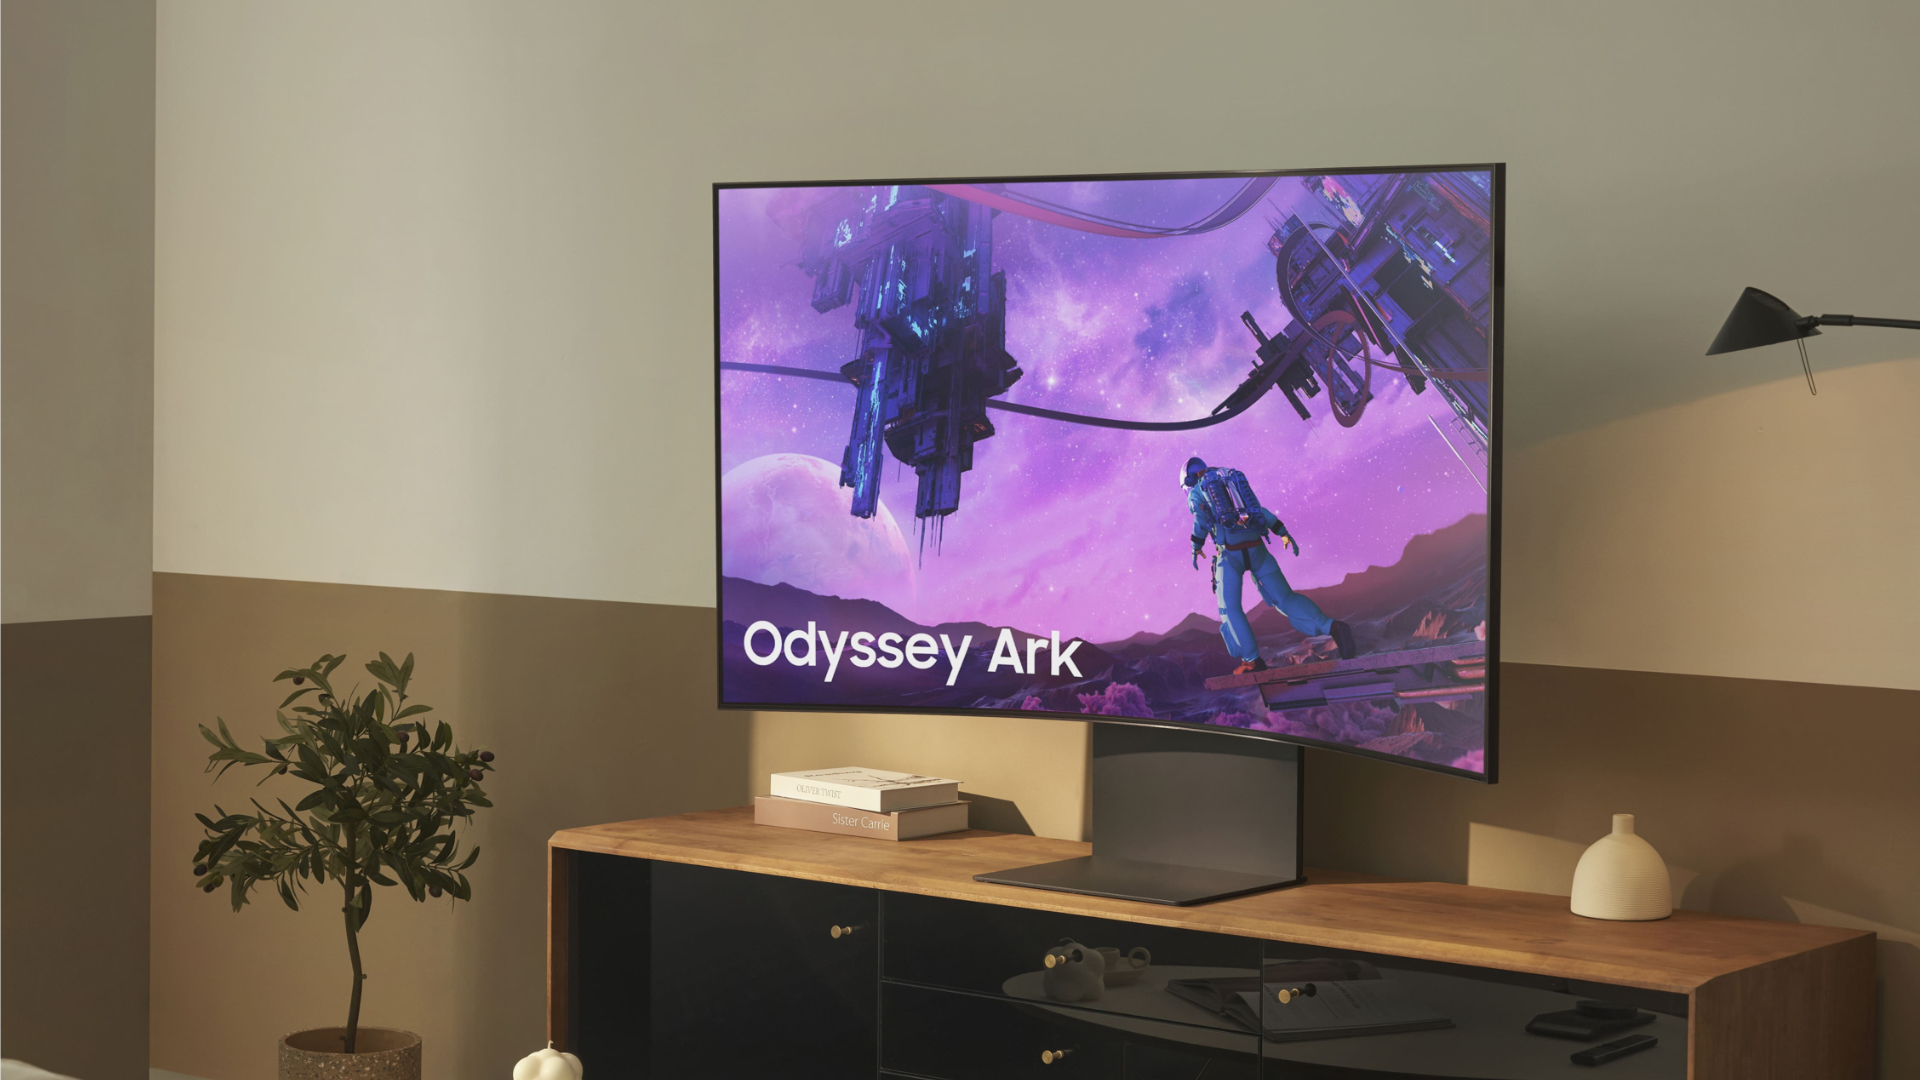 Samsung's 2nd Gen Odyssey Ark monitor launched with some upgrades